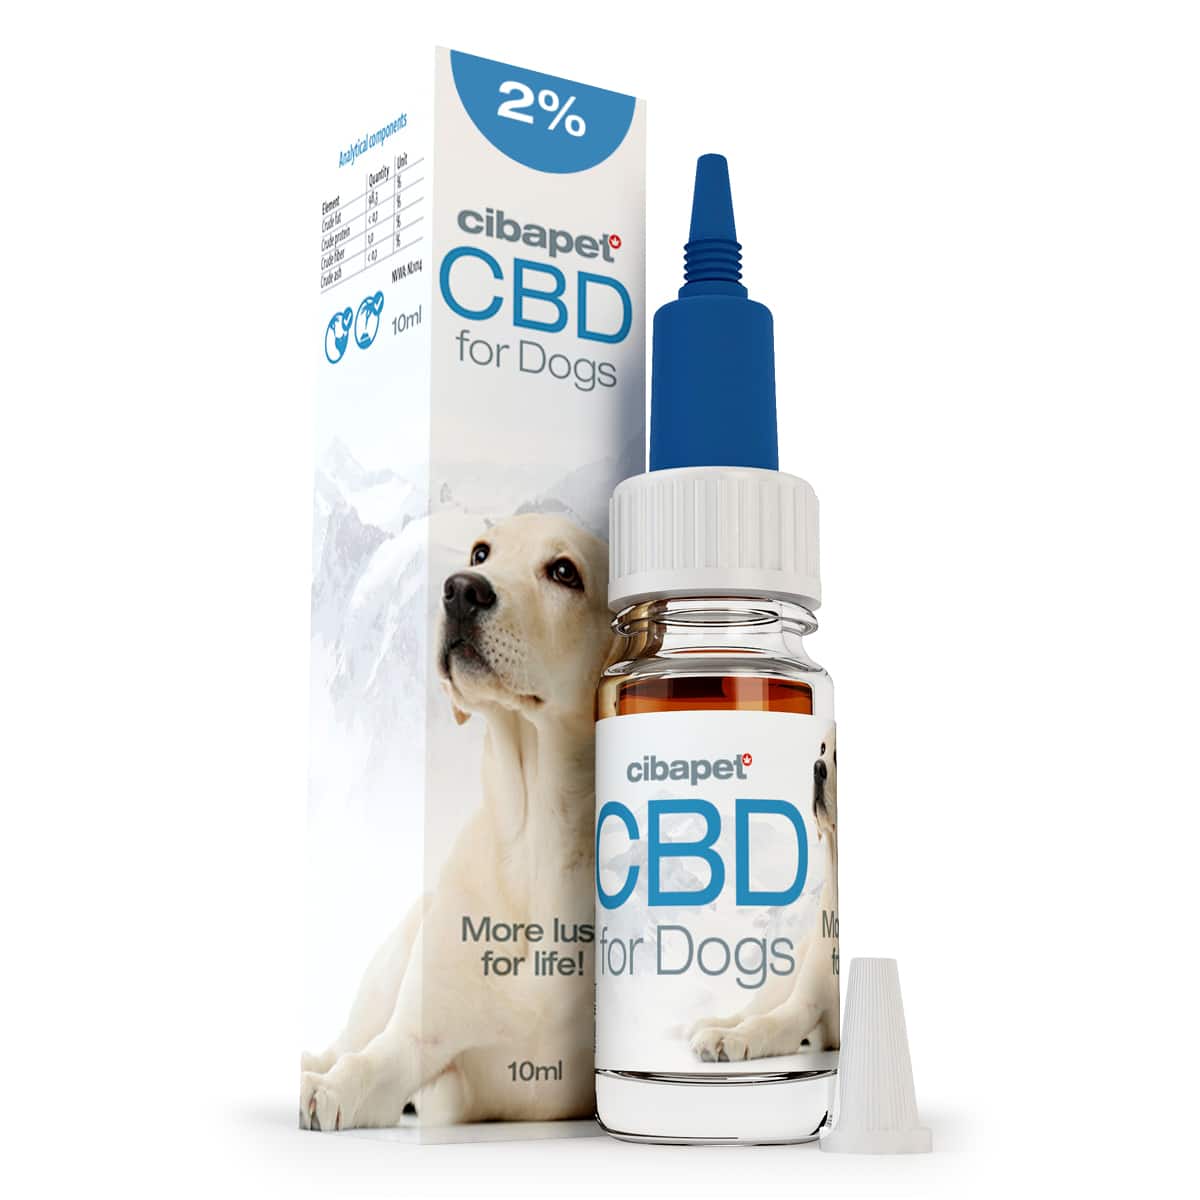 a bottle of cbd for dogs next to a box of cbd drops.